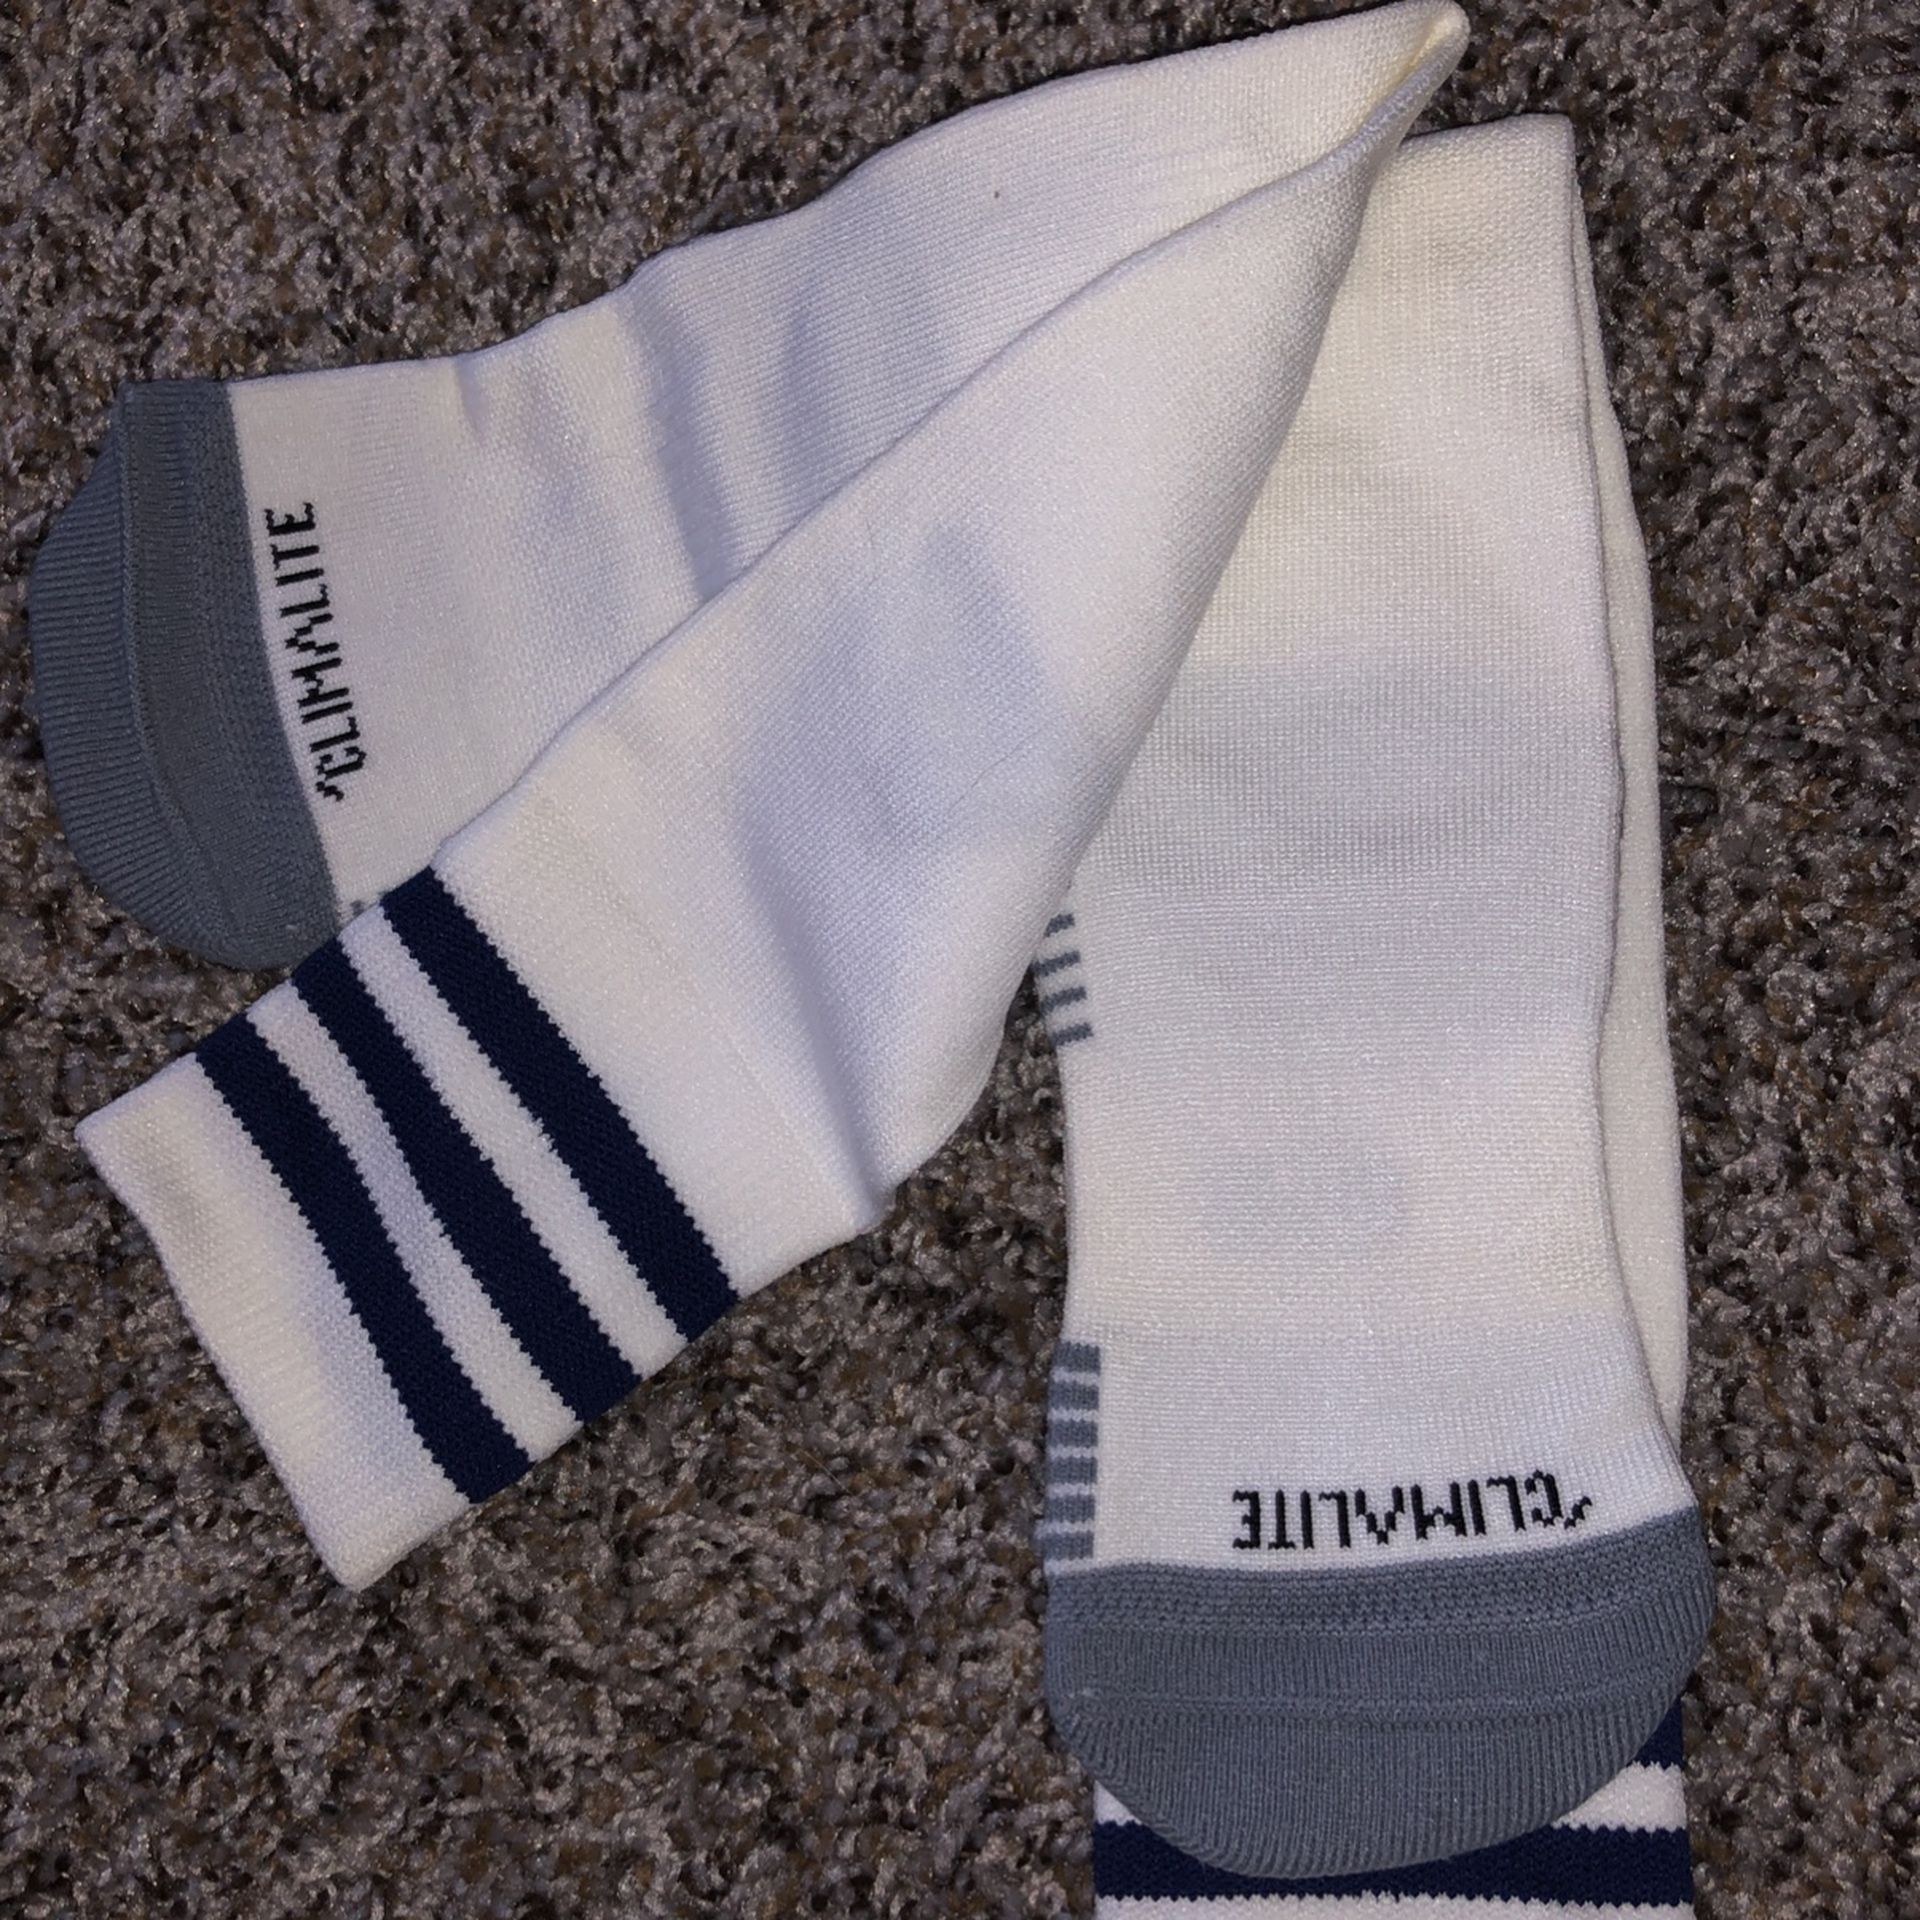 Adidas White And Navy Blue Game Day Socks: NEW